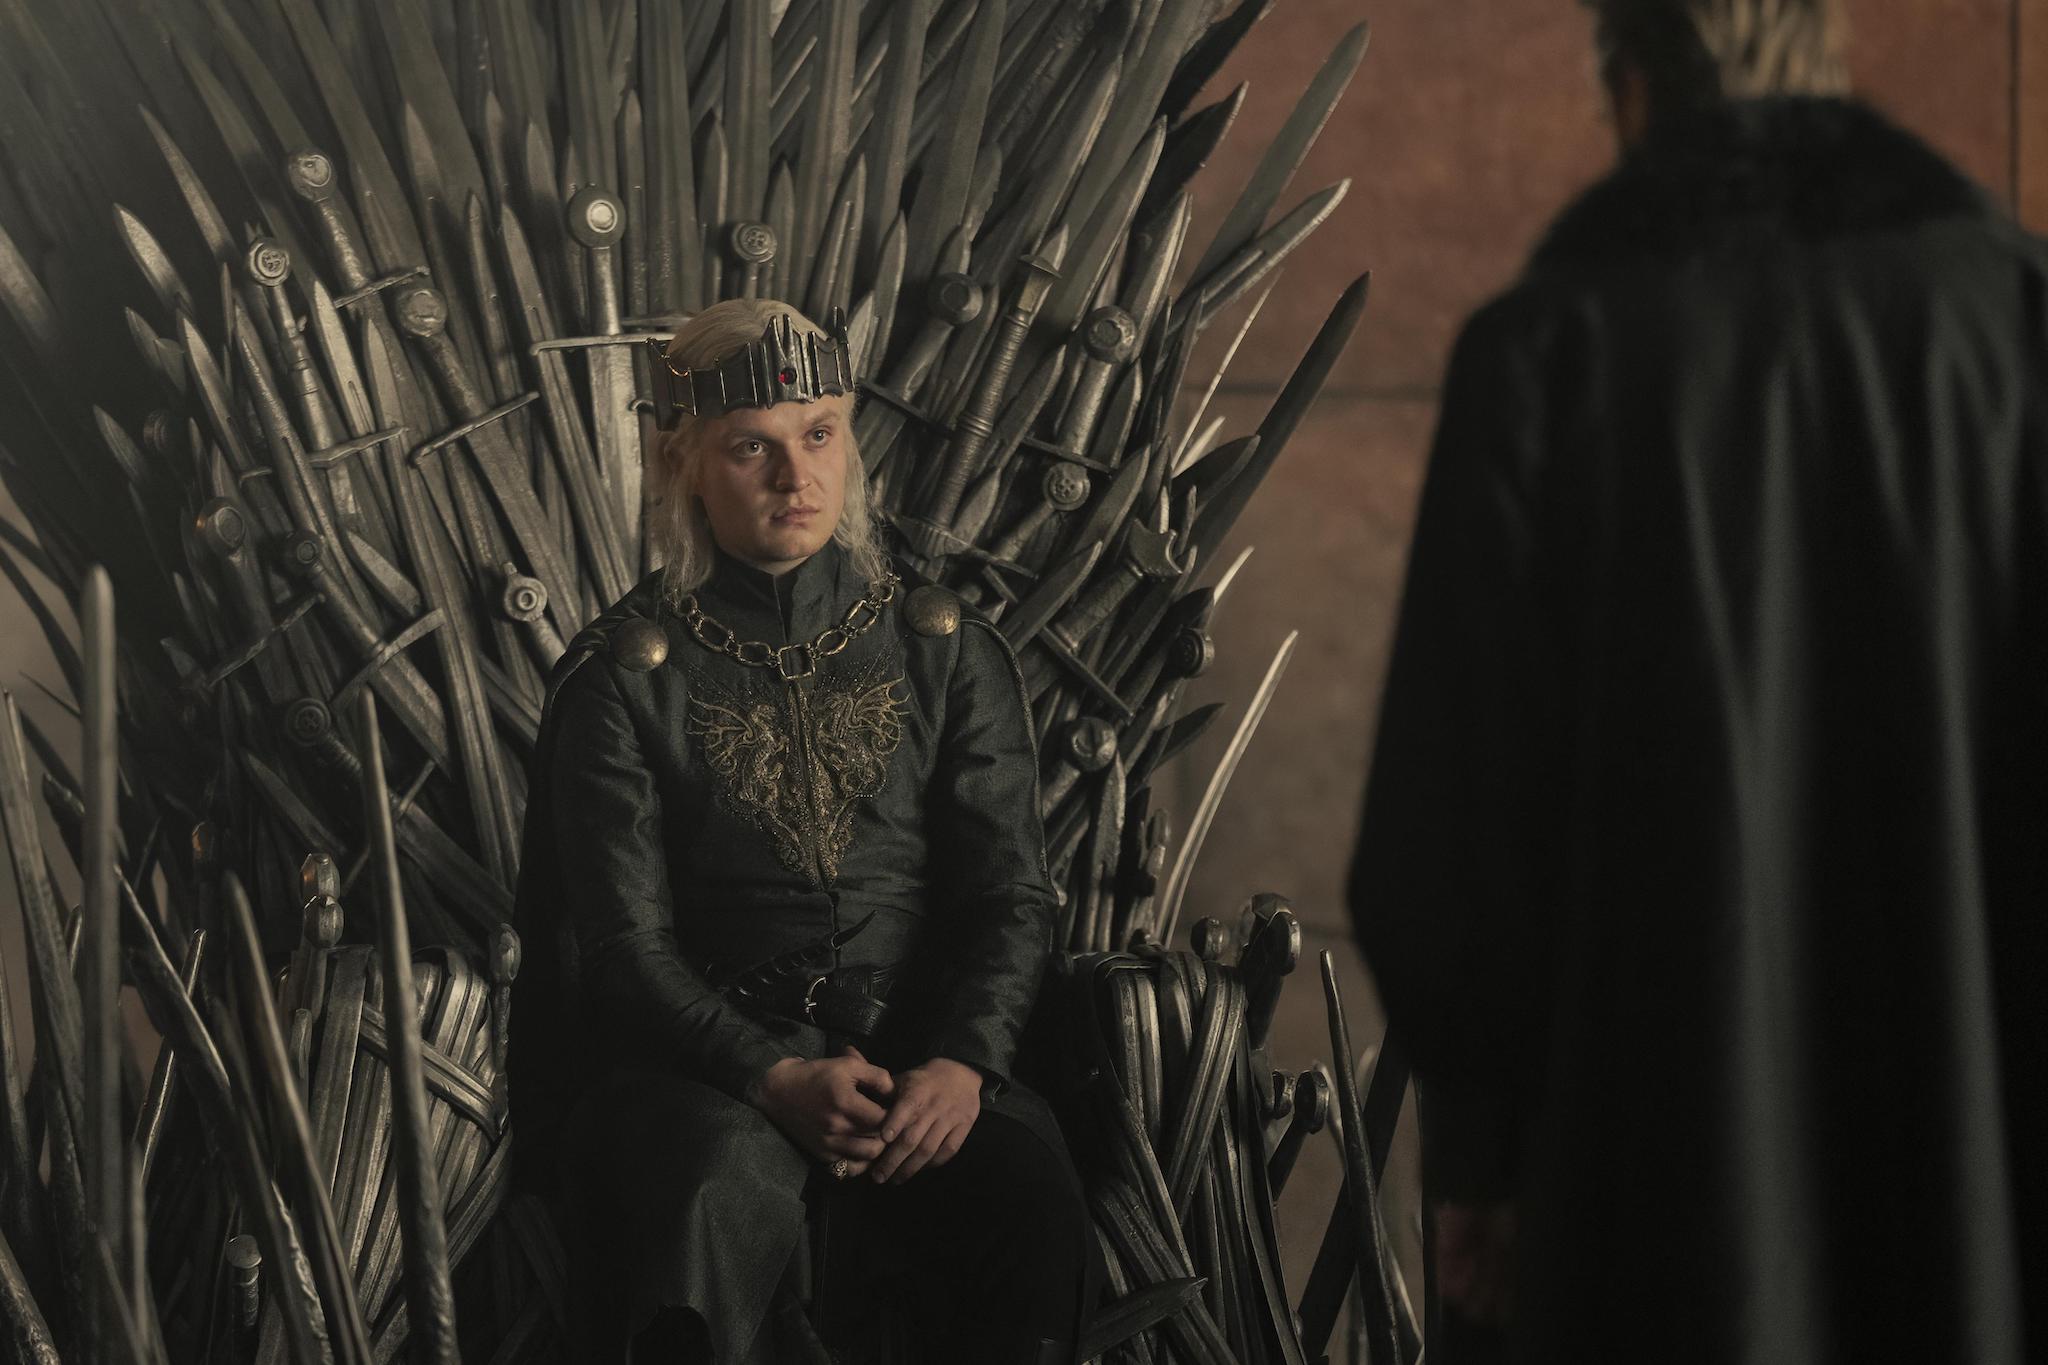 house of the dragon, game of thrones, alfie allen, house of the dragon’s tom glynn-carney: ‘game of thrones was too close to oversexualising women’